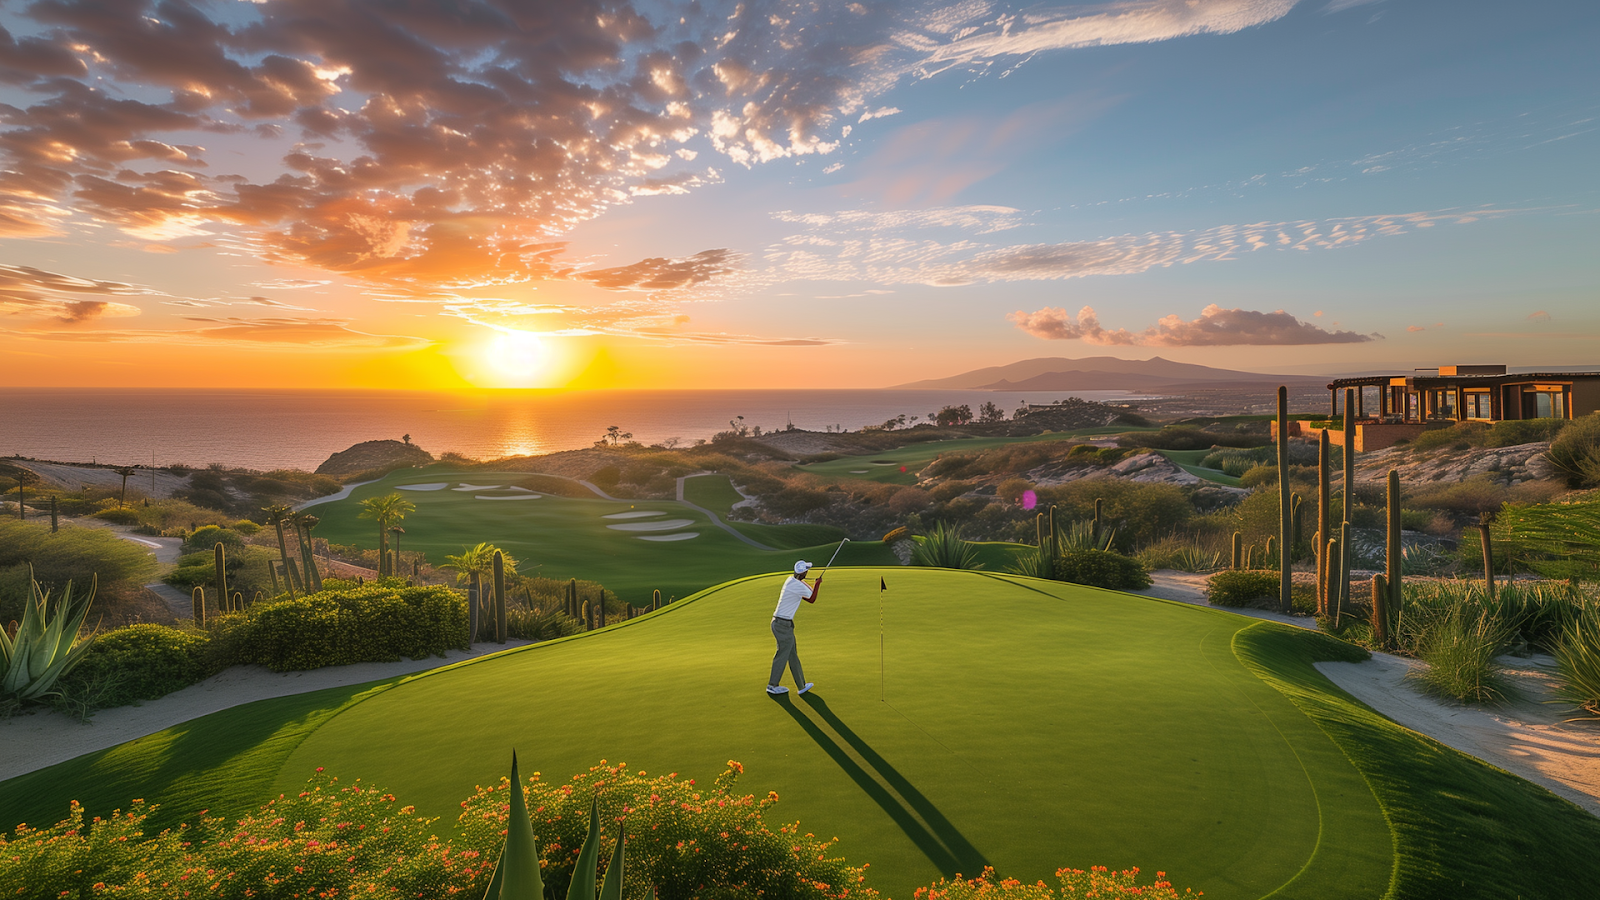 Golfer teeing off at Cabo del Sol Golf Club with sunrise colors in the background, Los Cabos, Mexico.